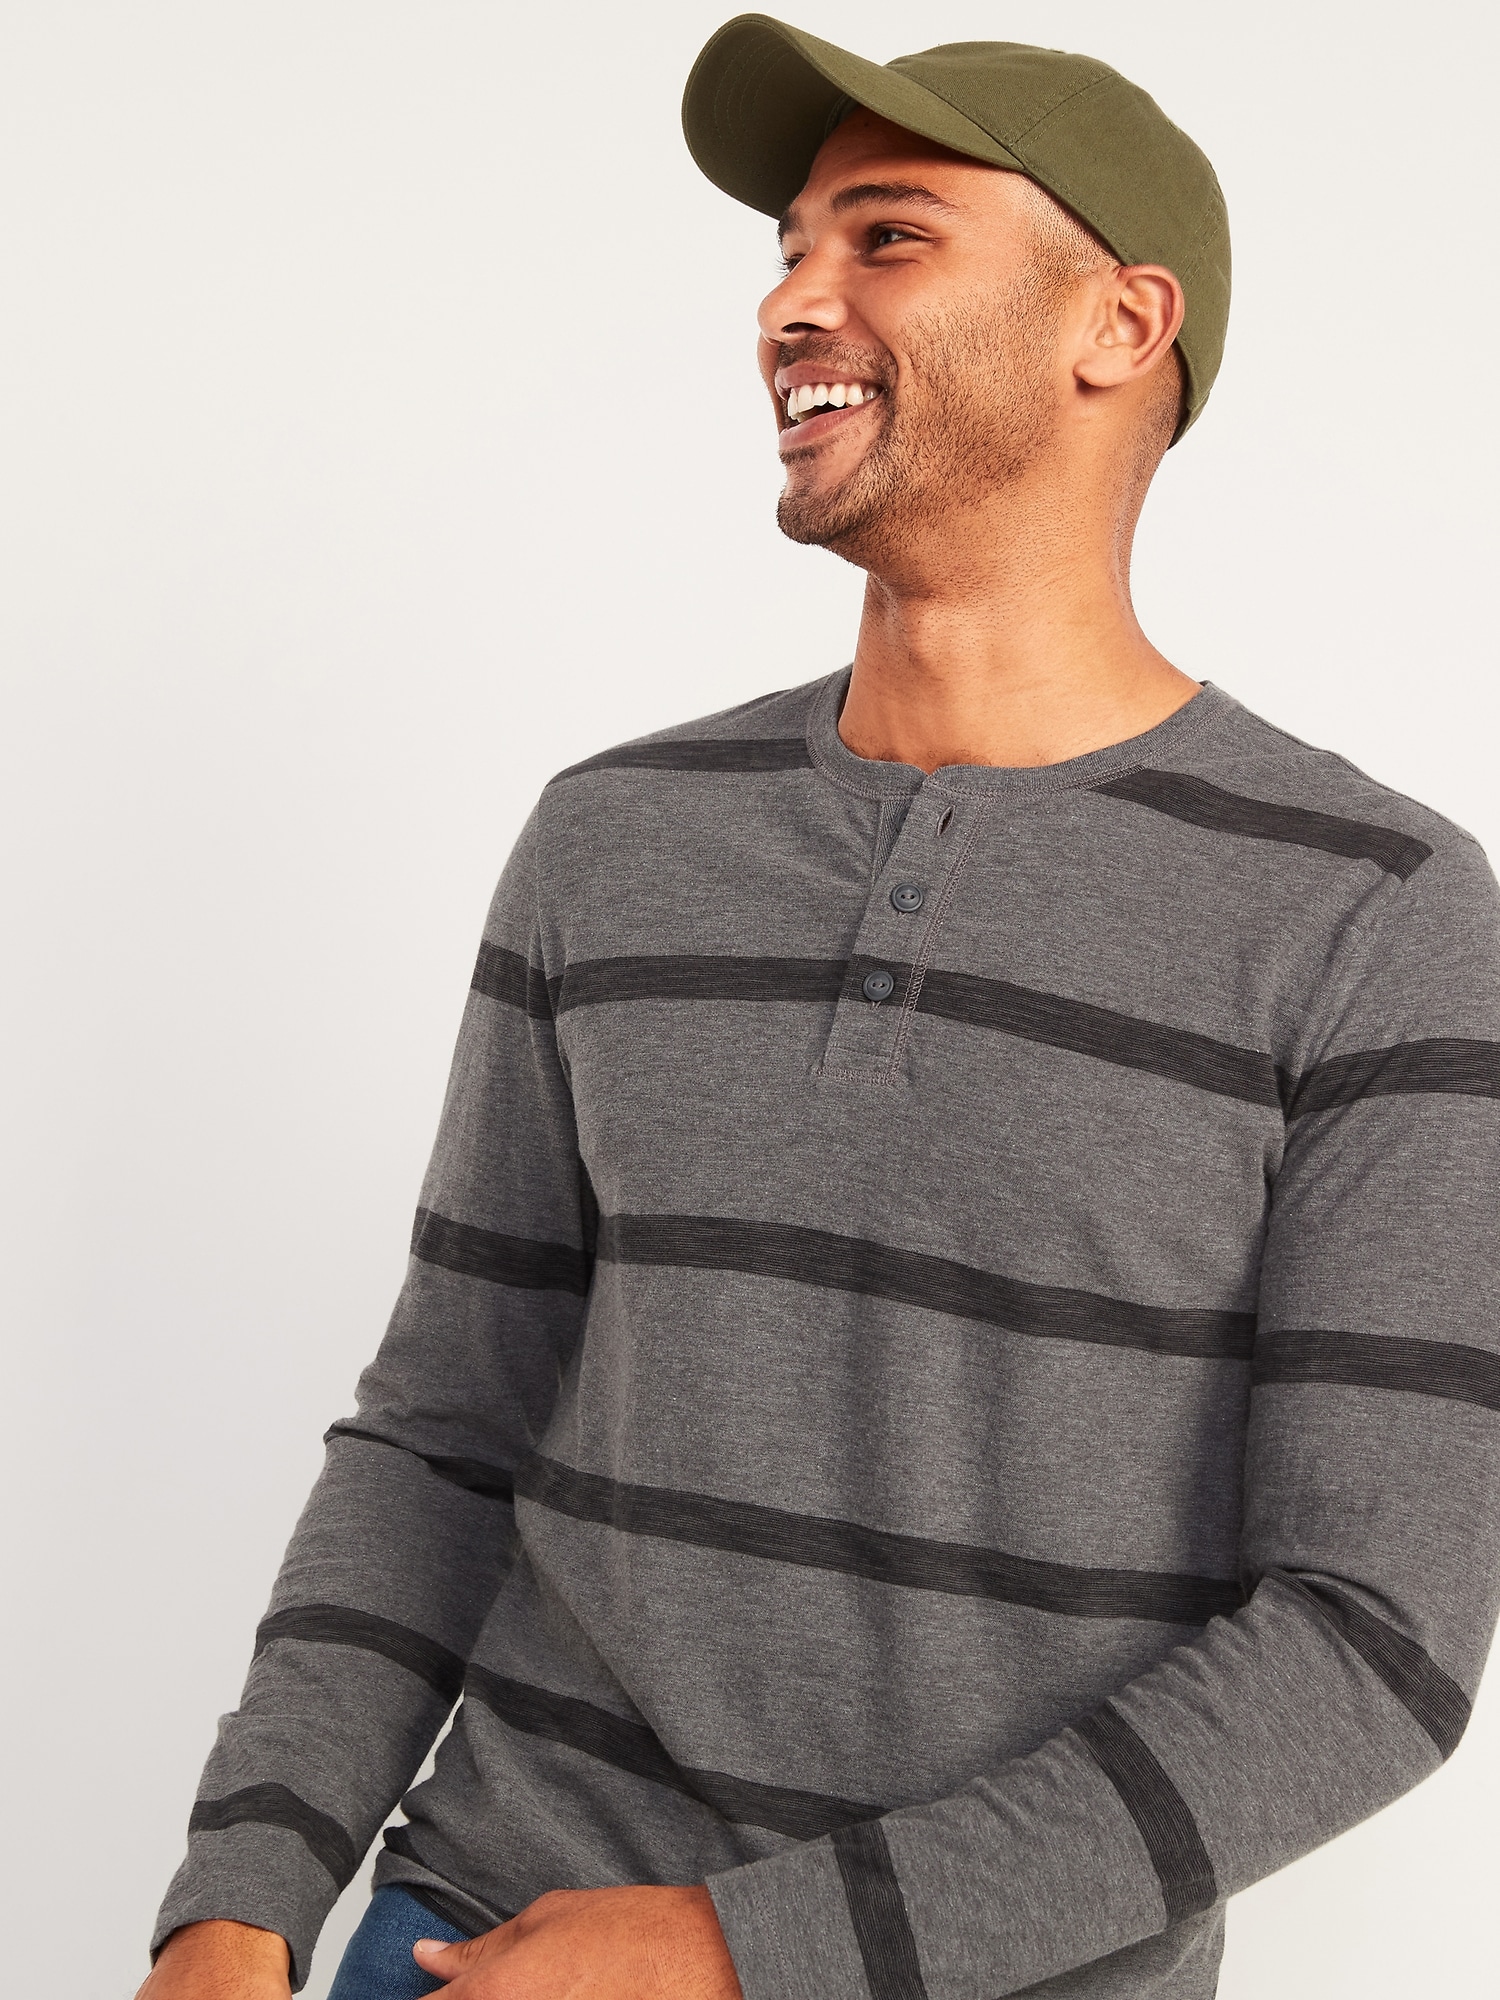 Soft-Washed Striped Long-Sleeve Henley T-Shirt